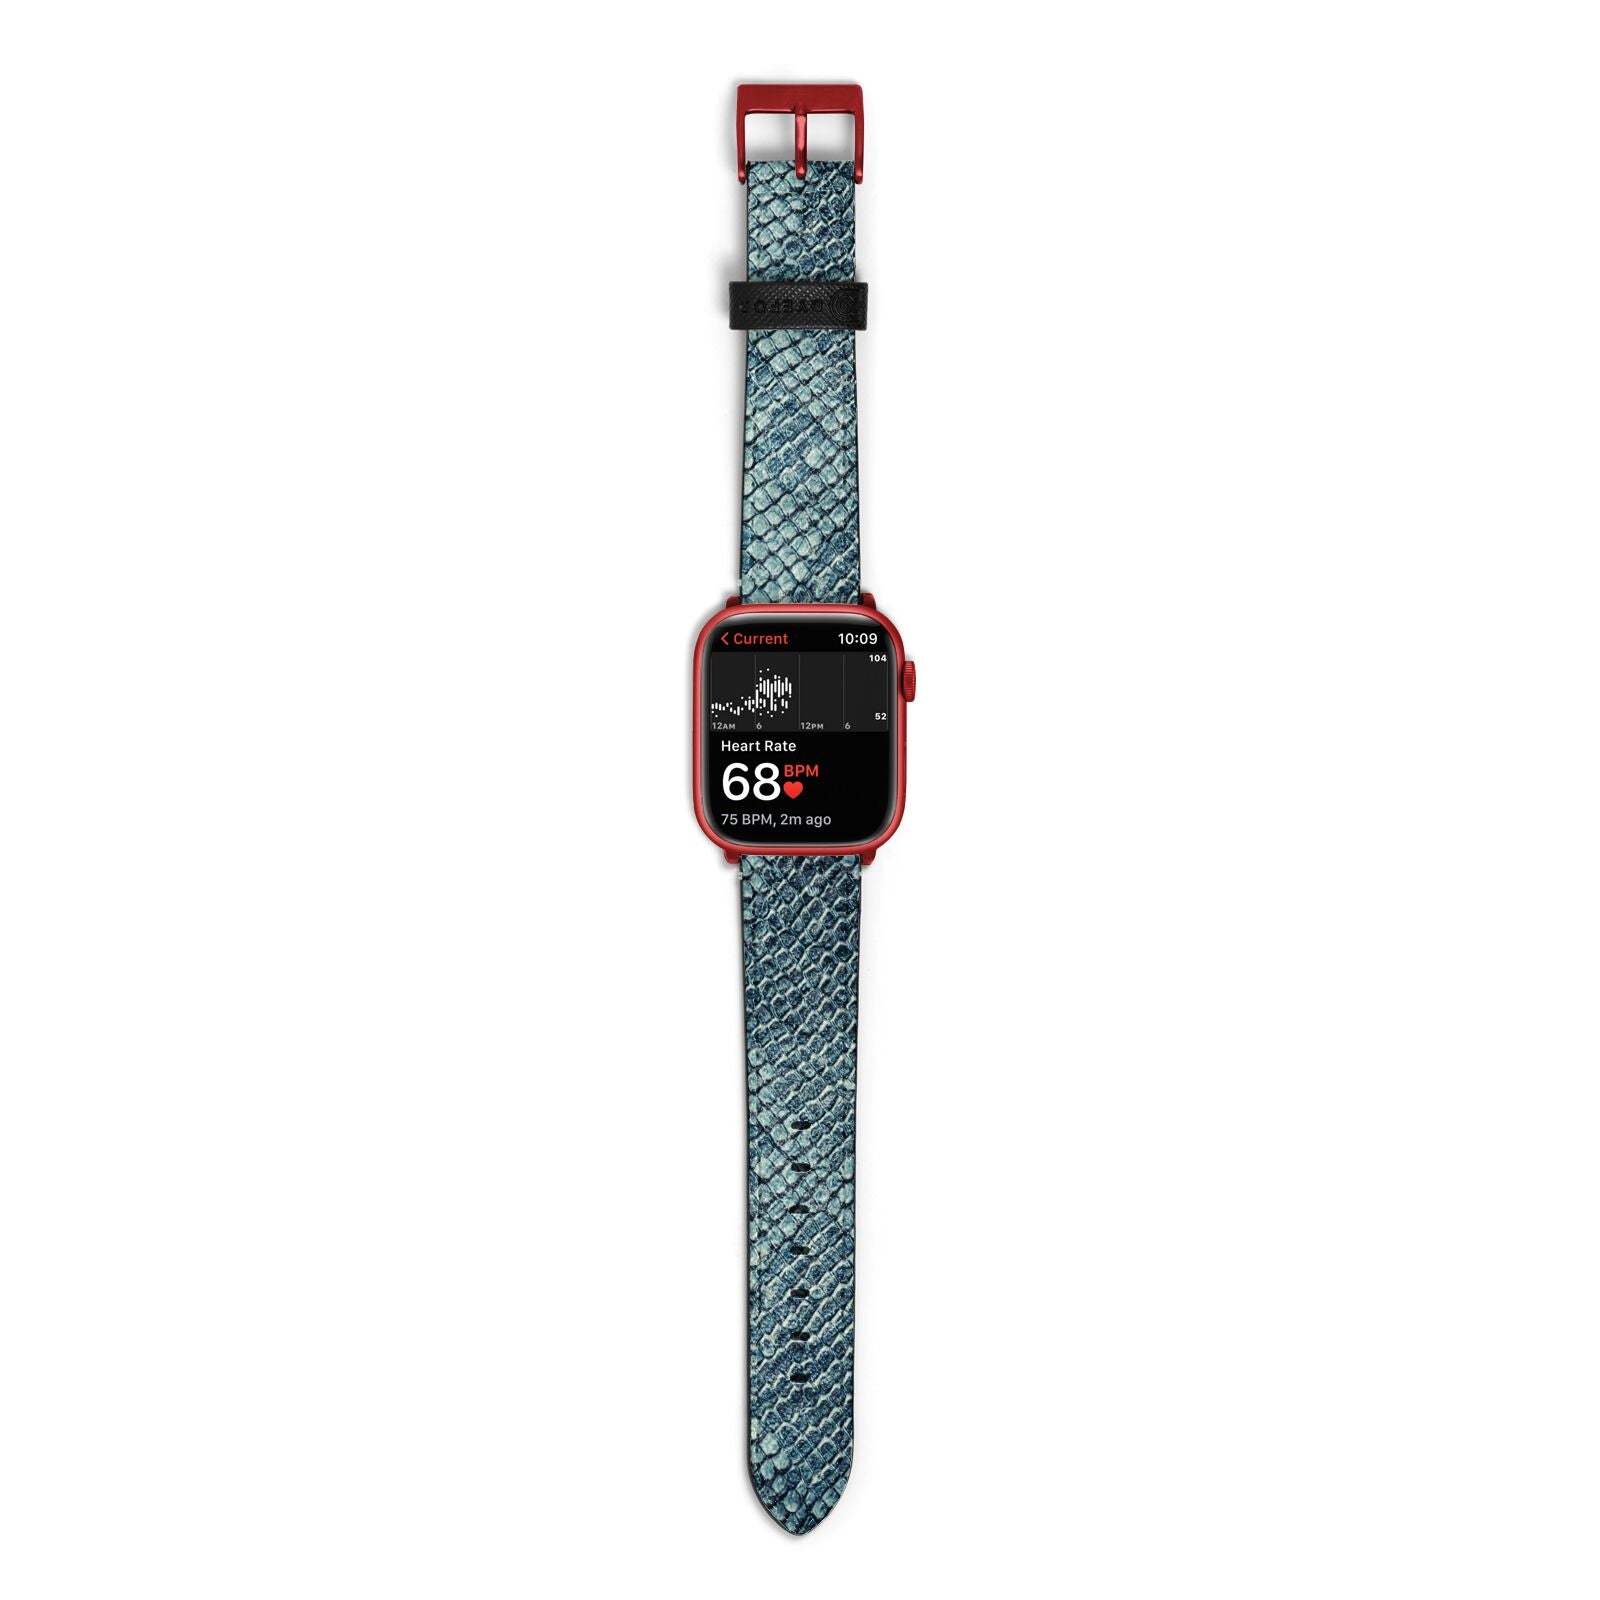 Teal Snakeskin Apple Watch Strap Size 38mm with Red Hardware